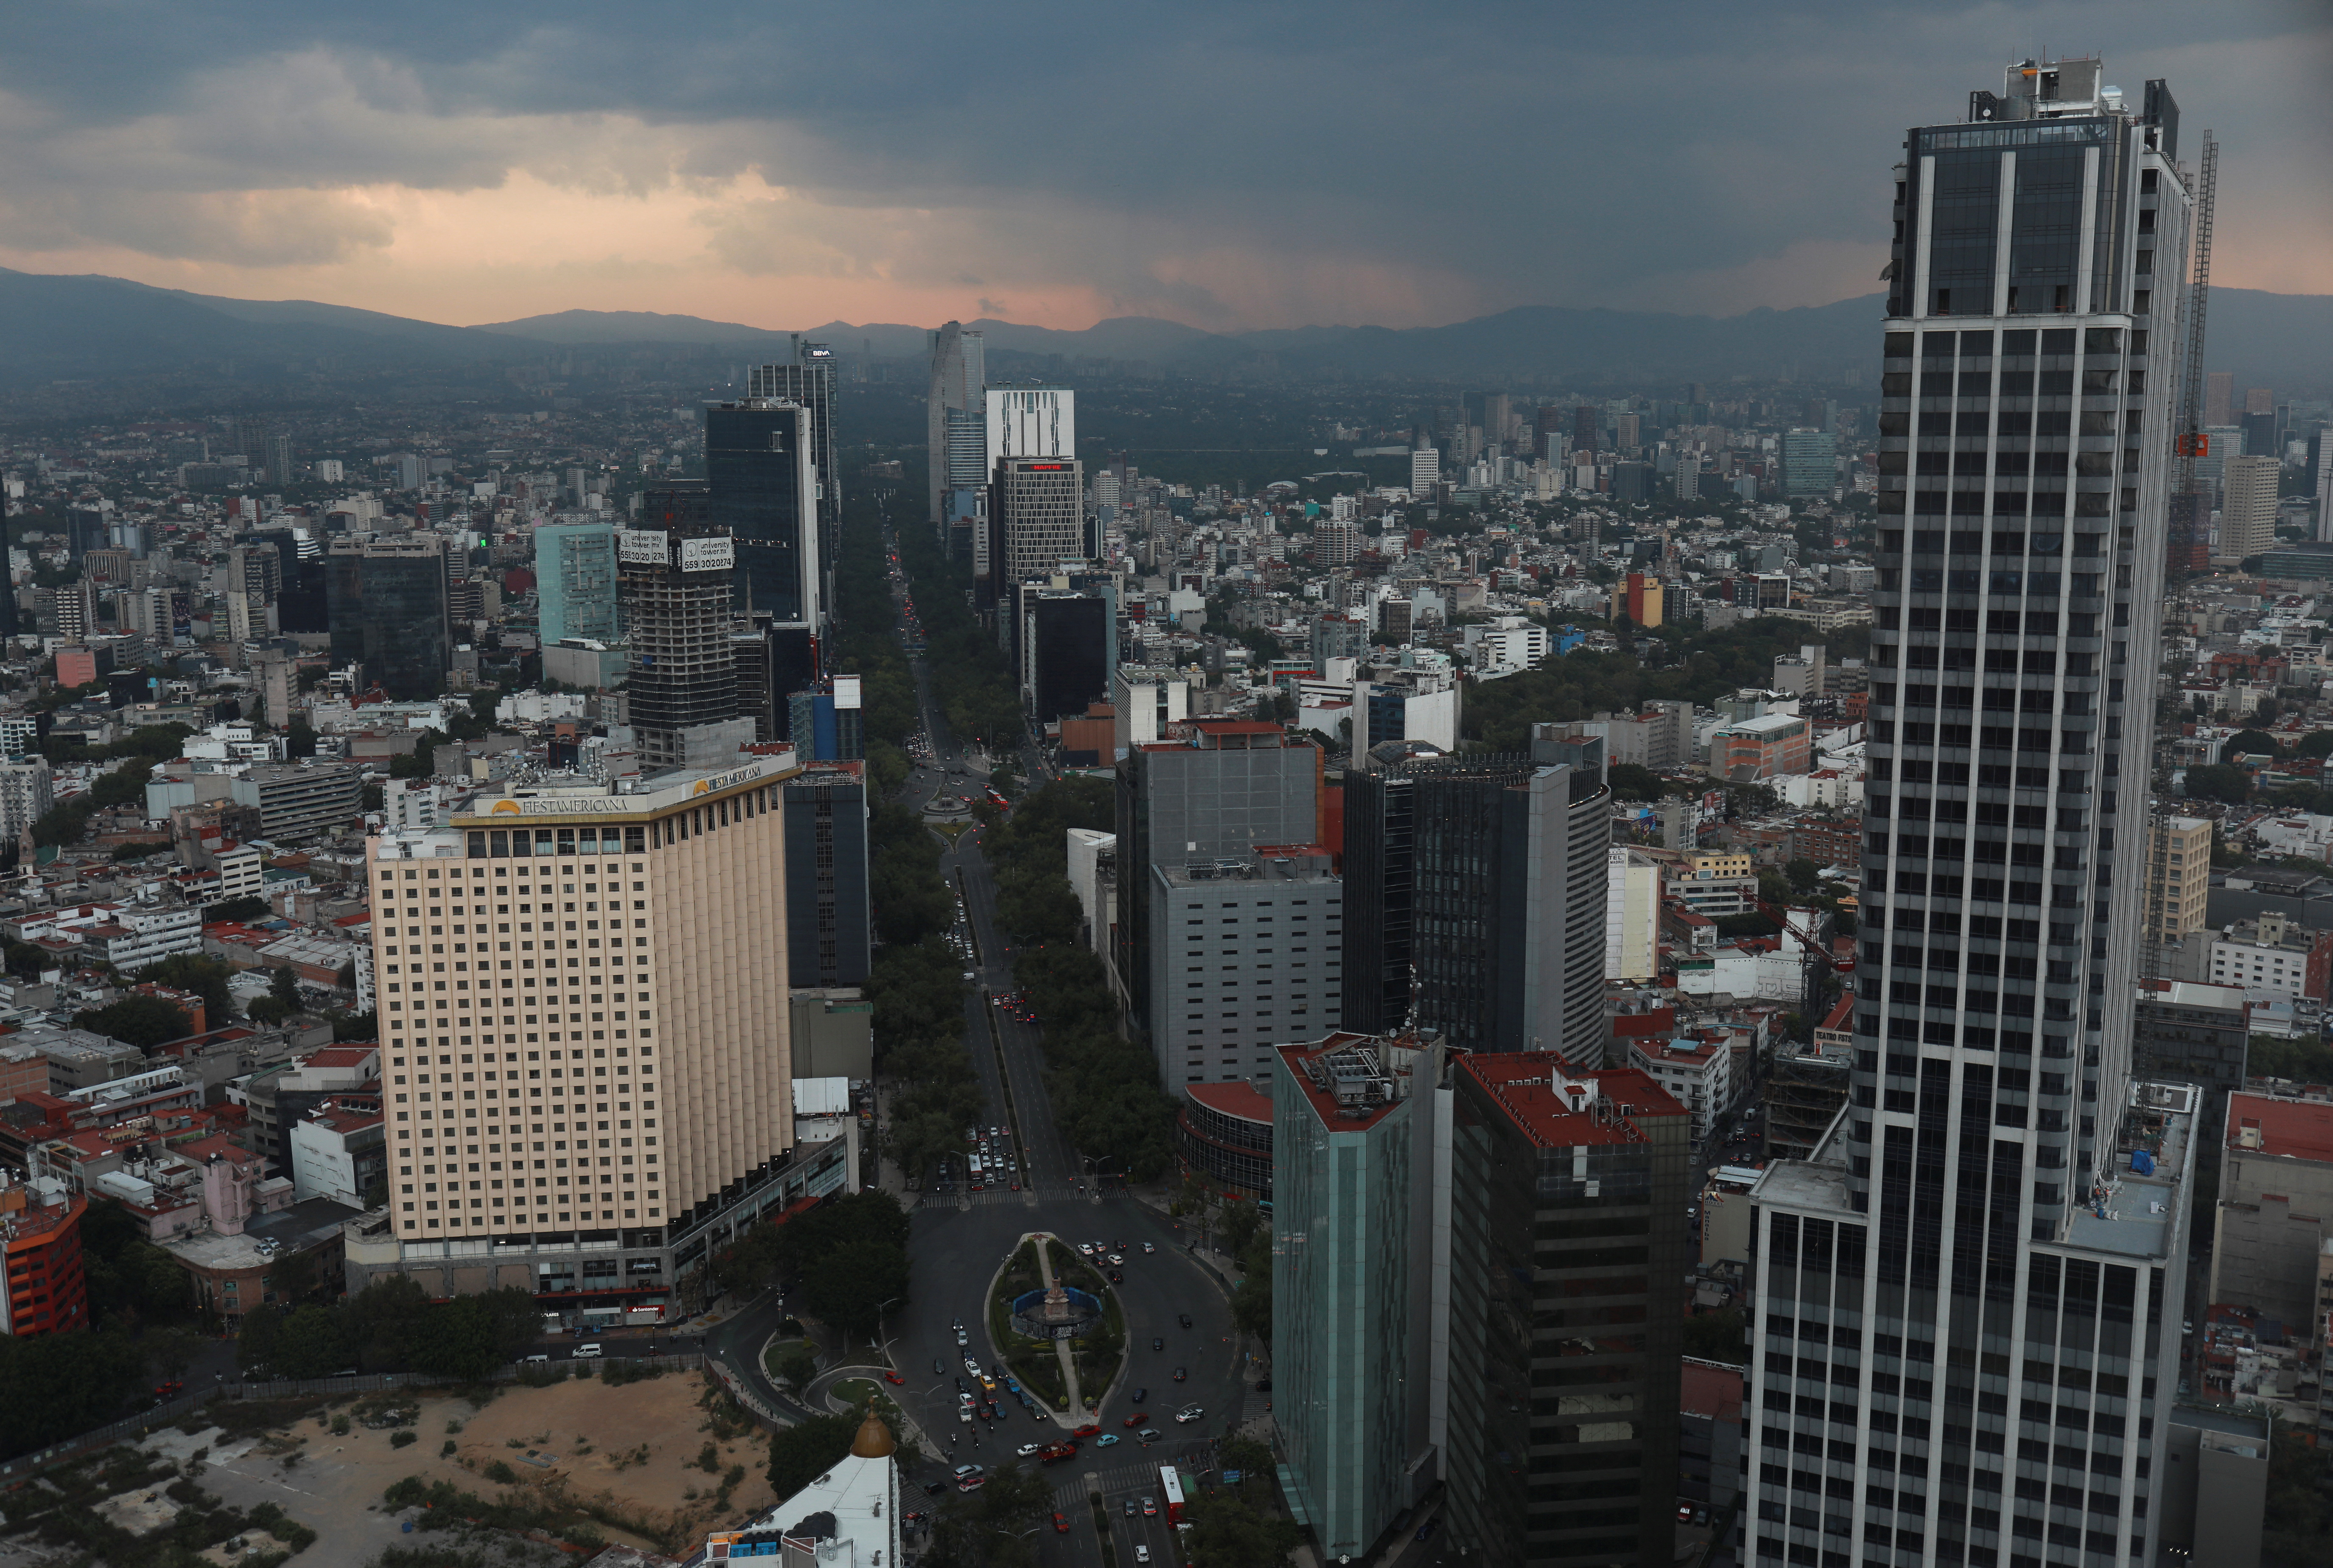 A general view shows cars along Reforma Avenue in Mexico City